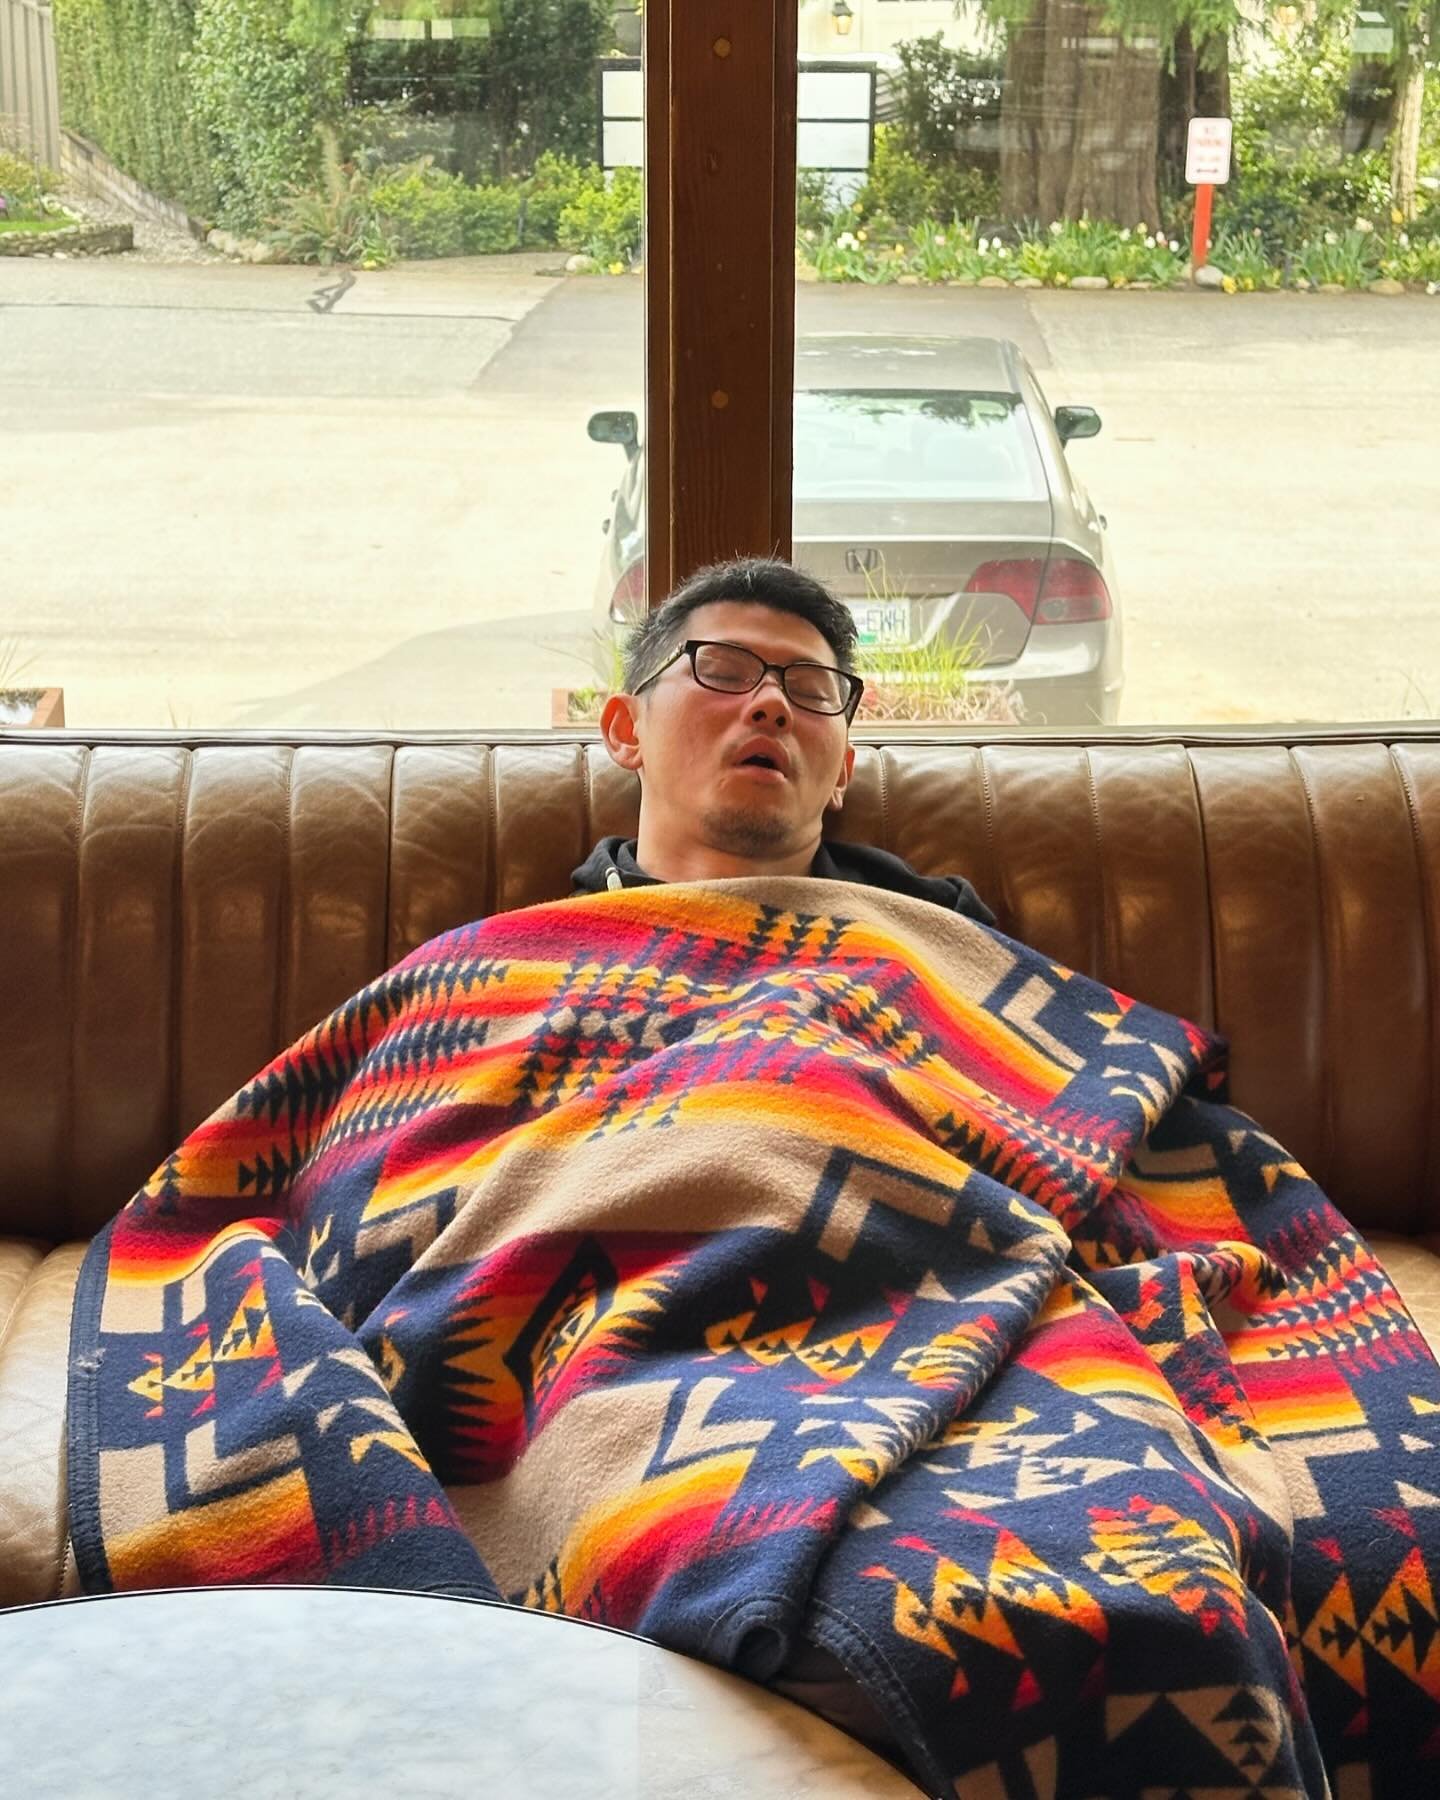 @dohizzle napping after a cray cray day and before new menu tasting. He will be missed 😂
All cozy with Mr. #pendleton blanket